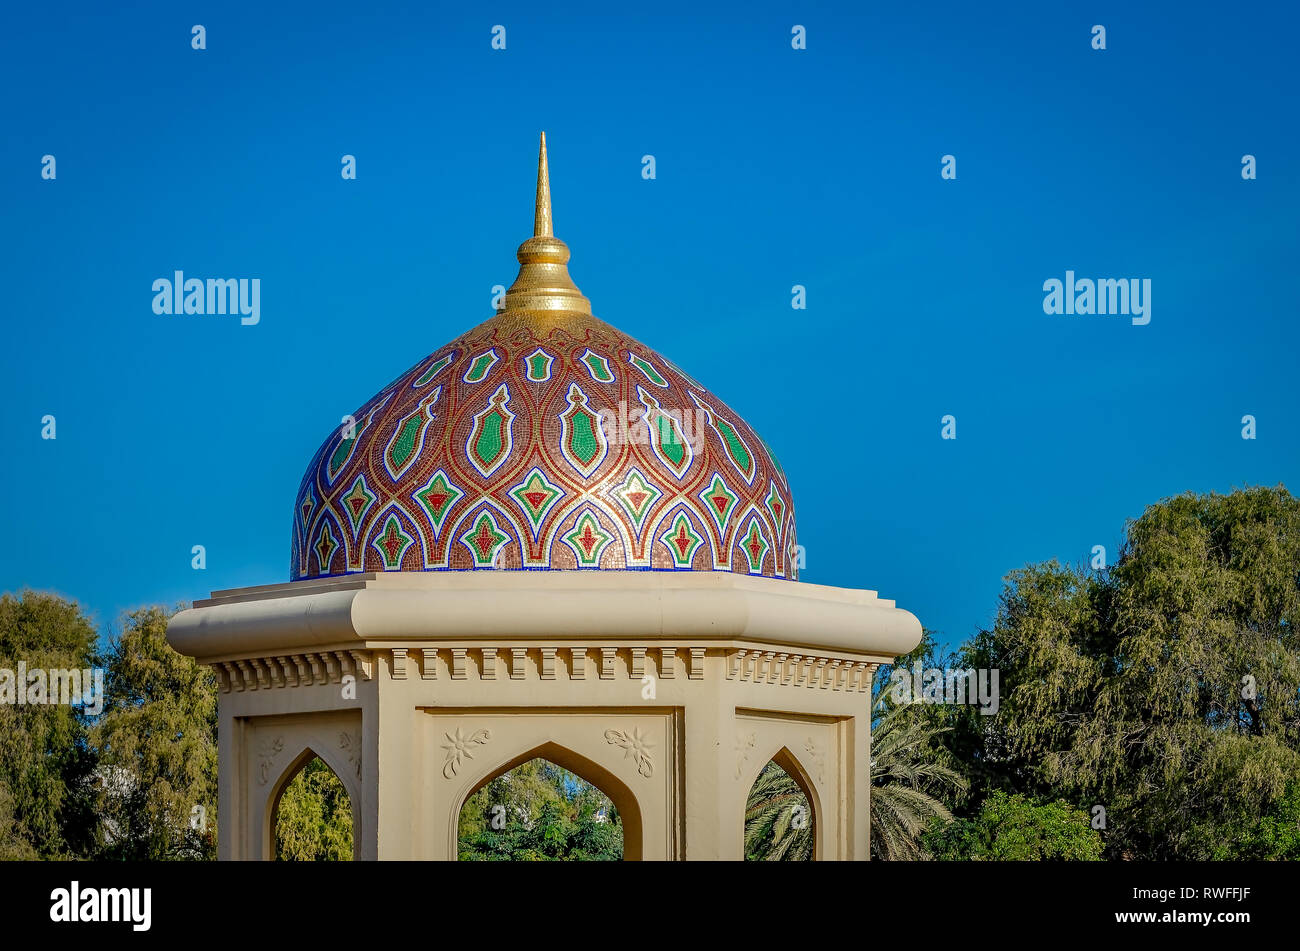 Artistic Gazebo Dome with a pointer against a clear blue sky. Middle Eastern Architecture from Oman. Stock Photo